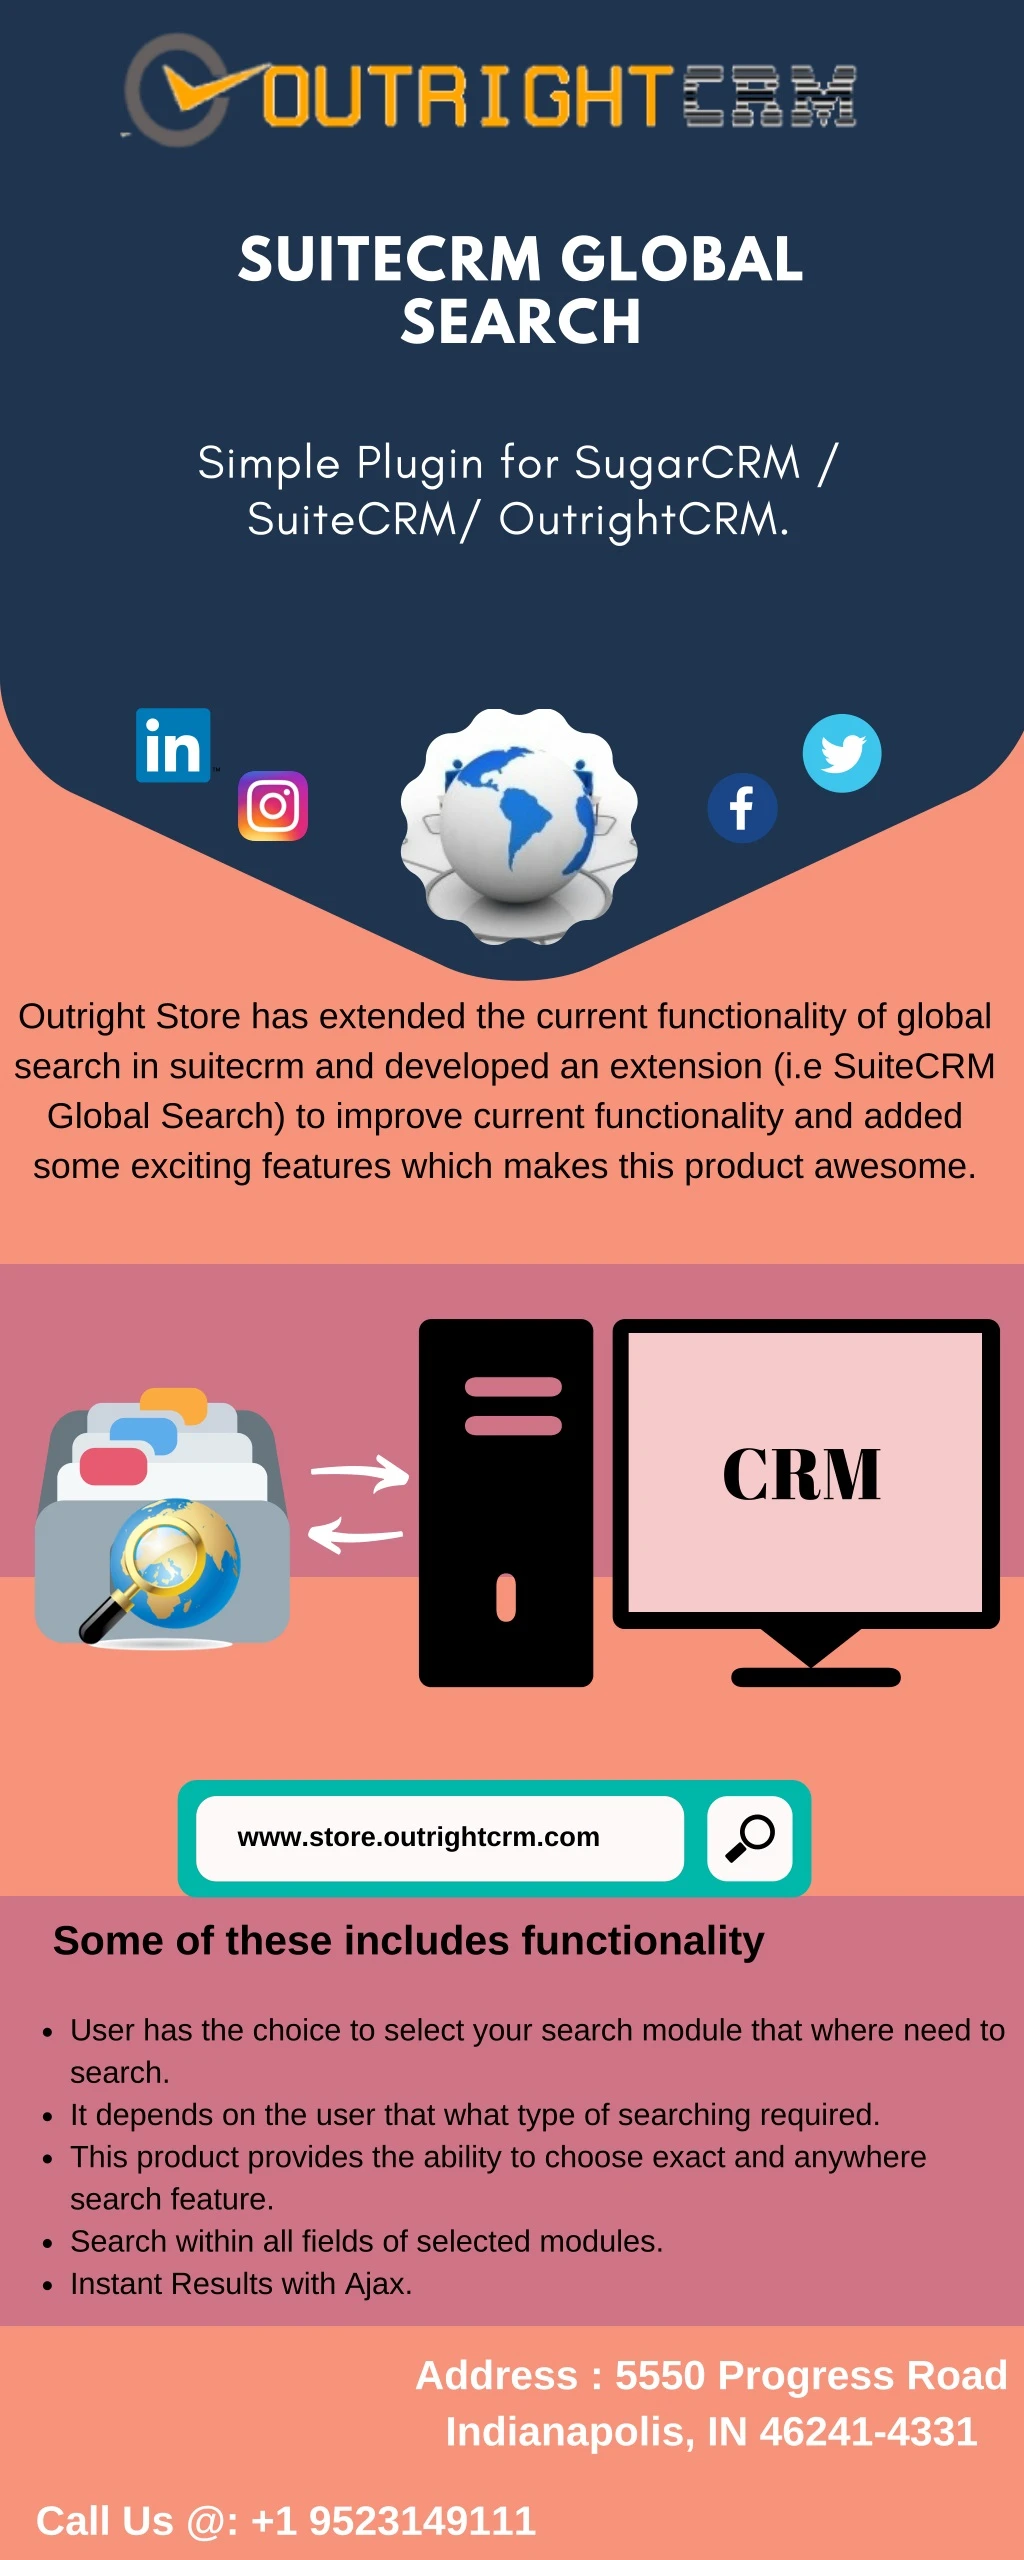 suitecrm global search